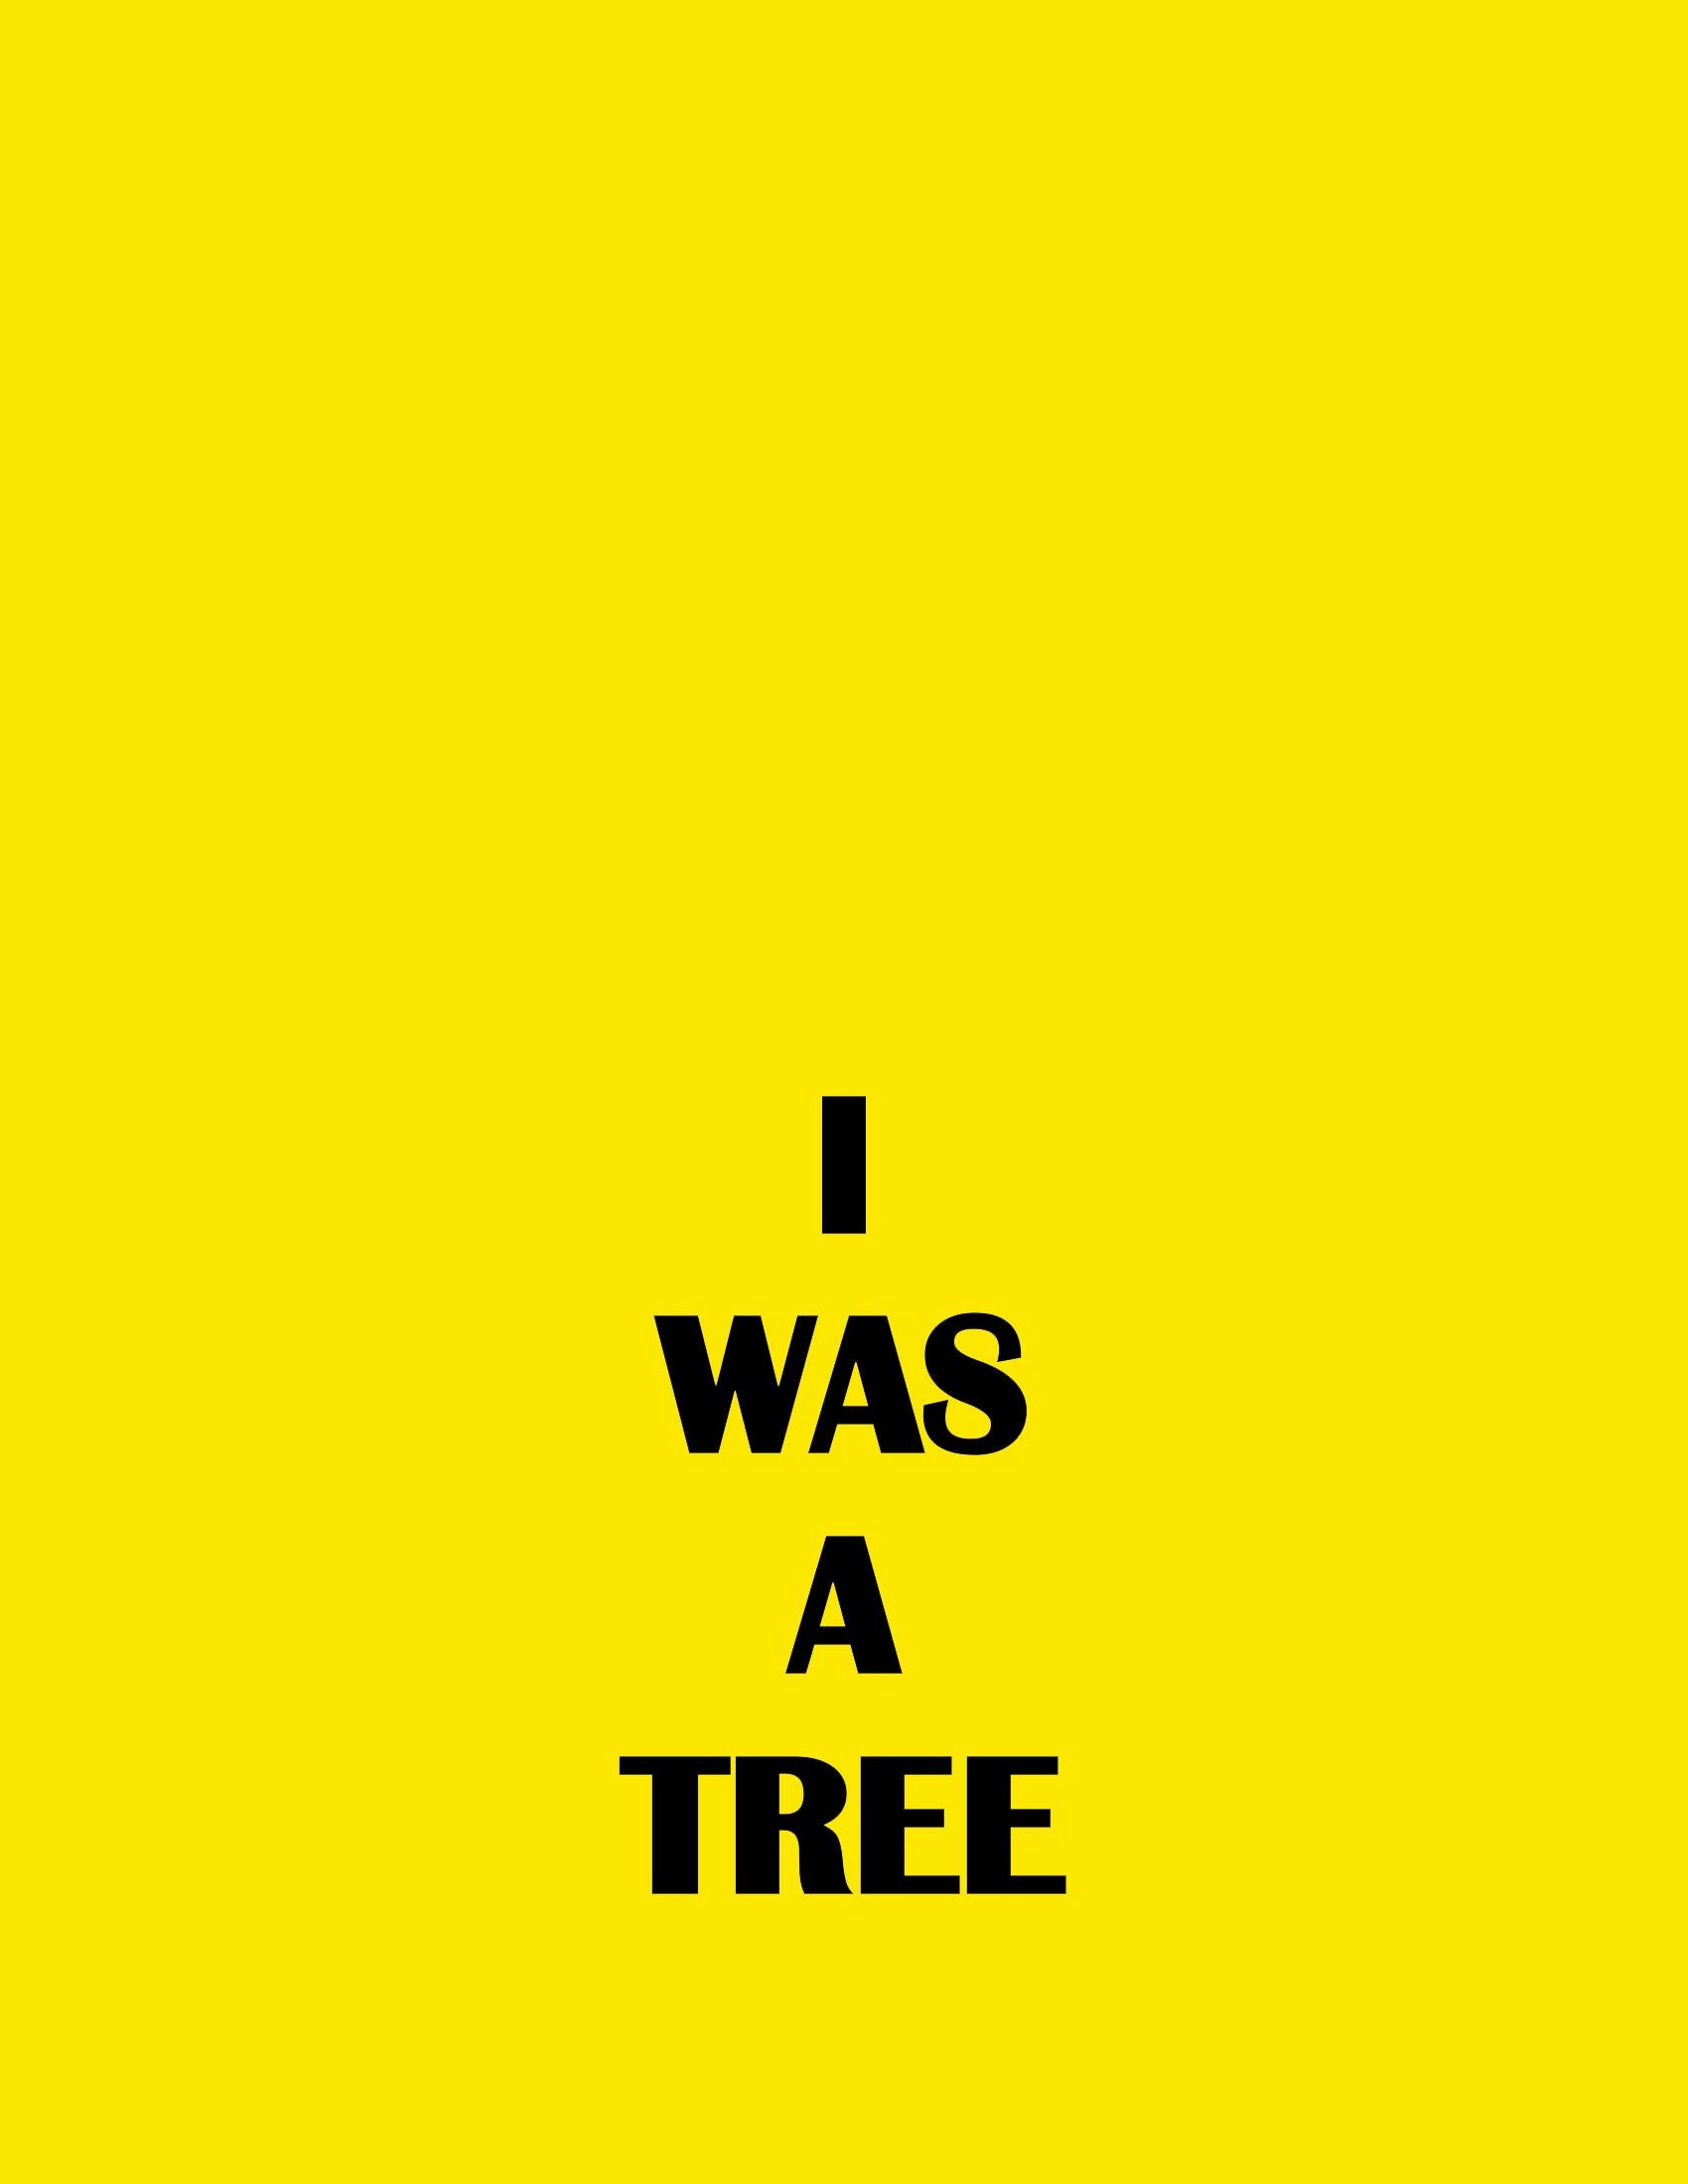 PLAYLIST - I WAS A TREE - Mixed Media Art by Mukesh Shah